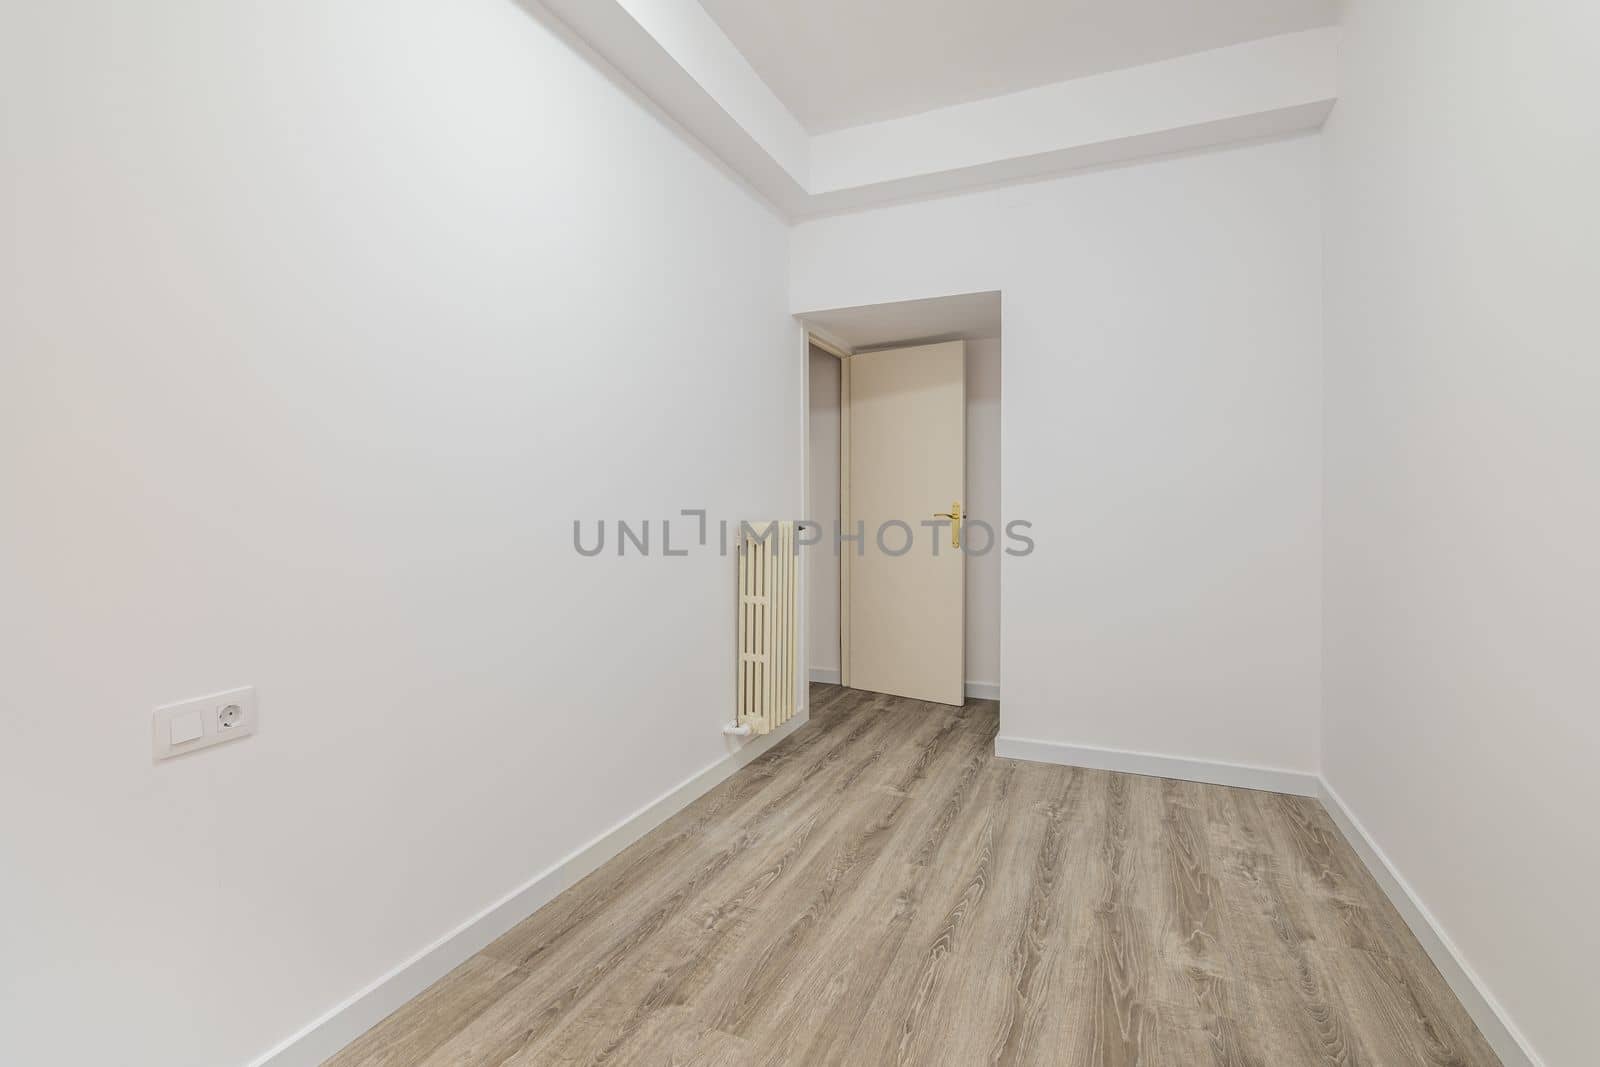 Empty room with laminate flooring and newly painted white wall in refurbished apartment with corridor leading to other rooms. Repair and construction concept. by apavlin